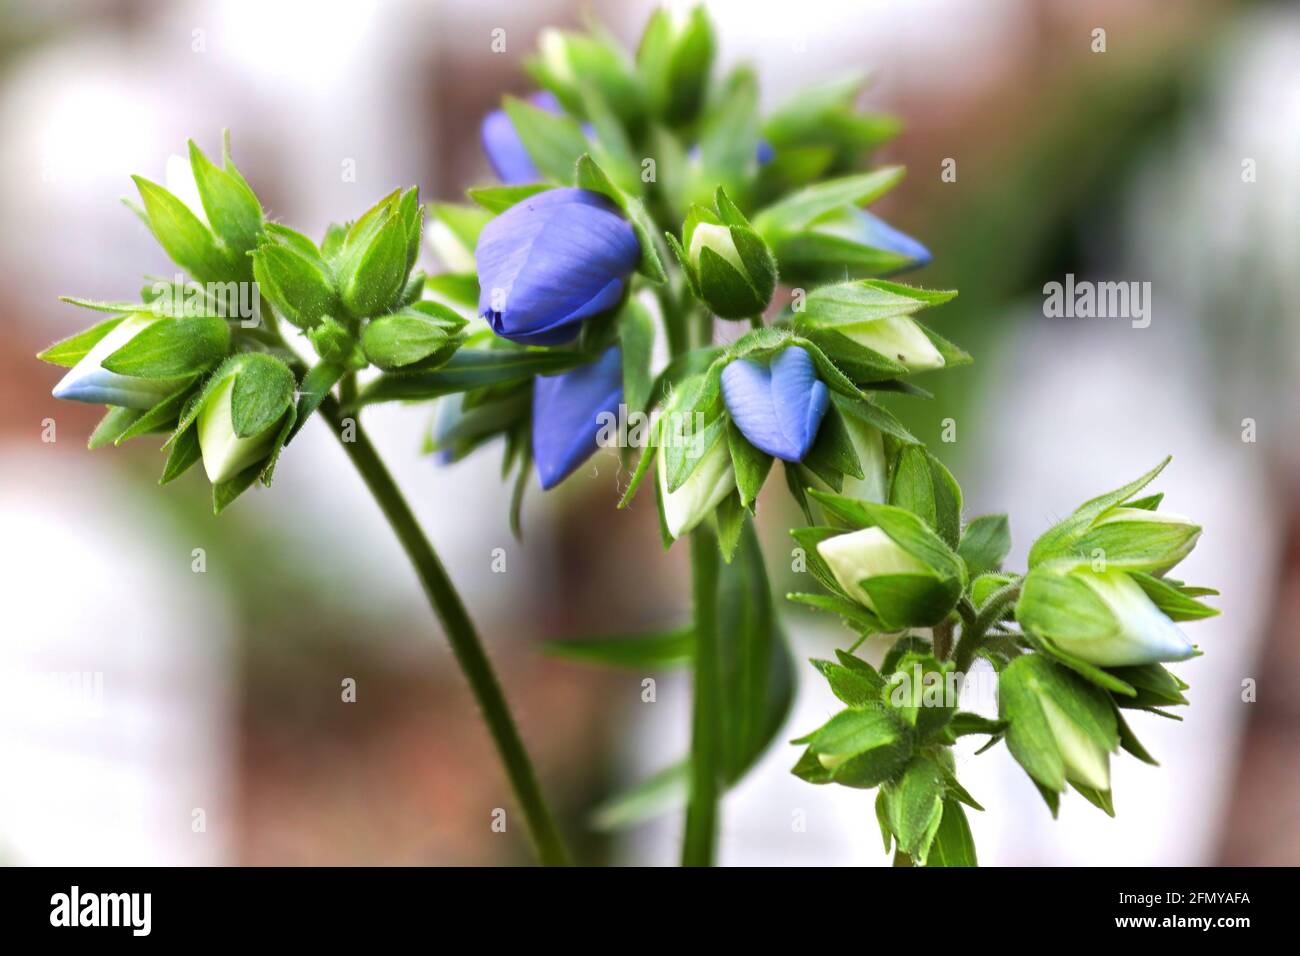 Curled closed blue buds on a Jacobs Ladder plant Stock Photo